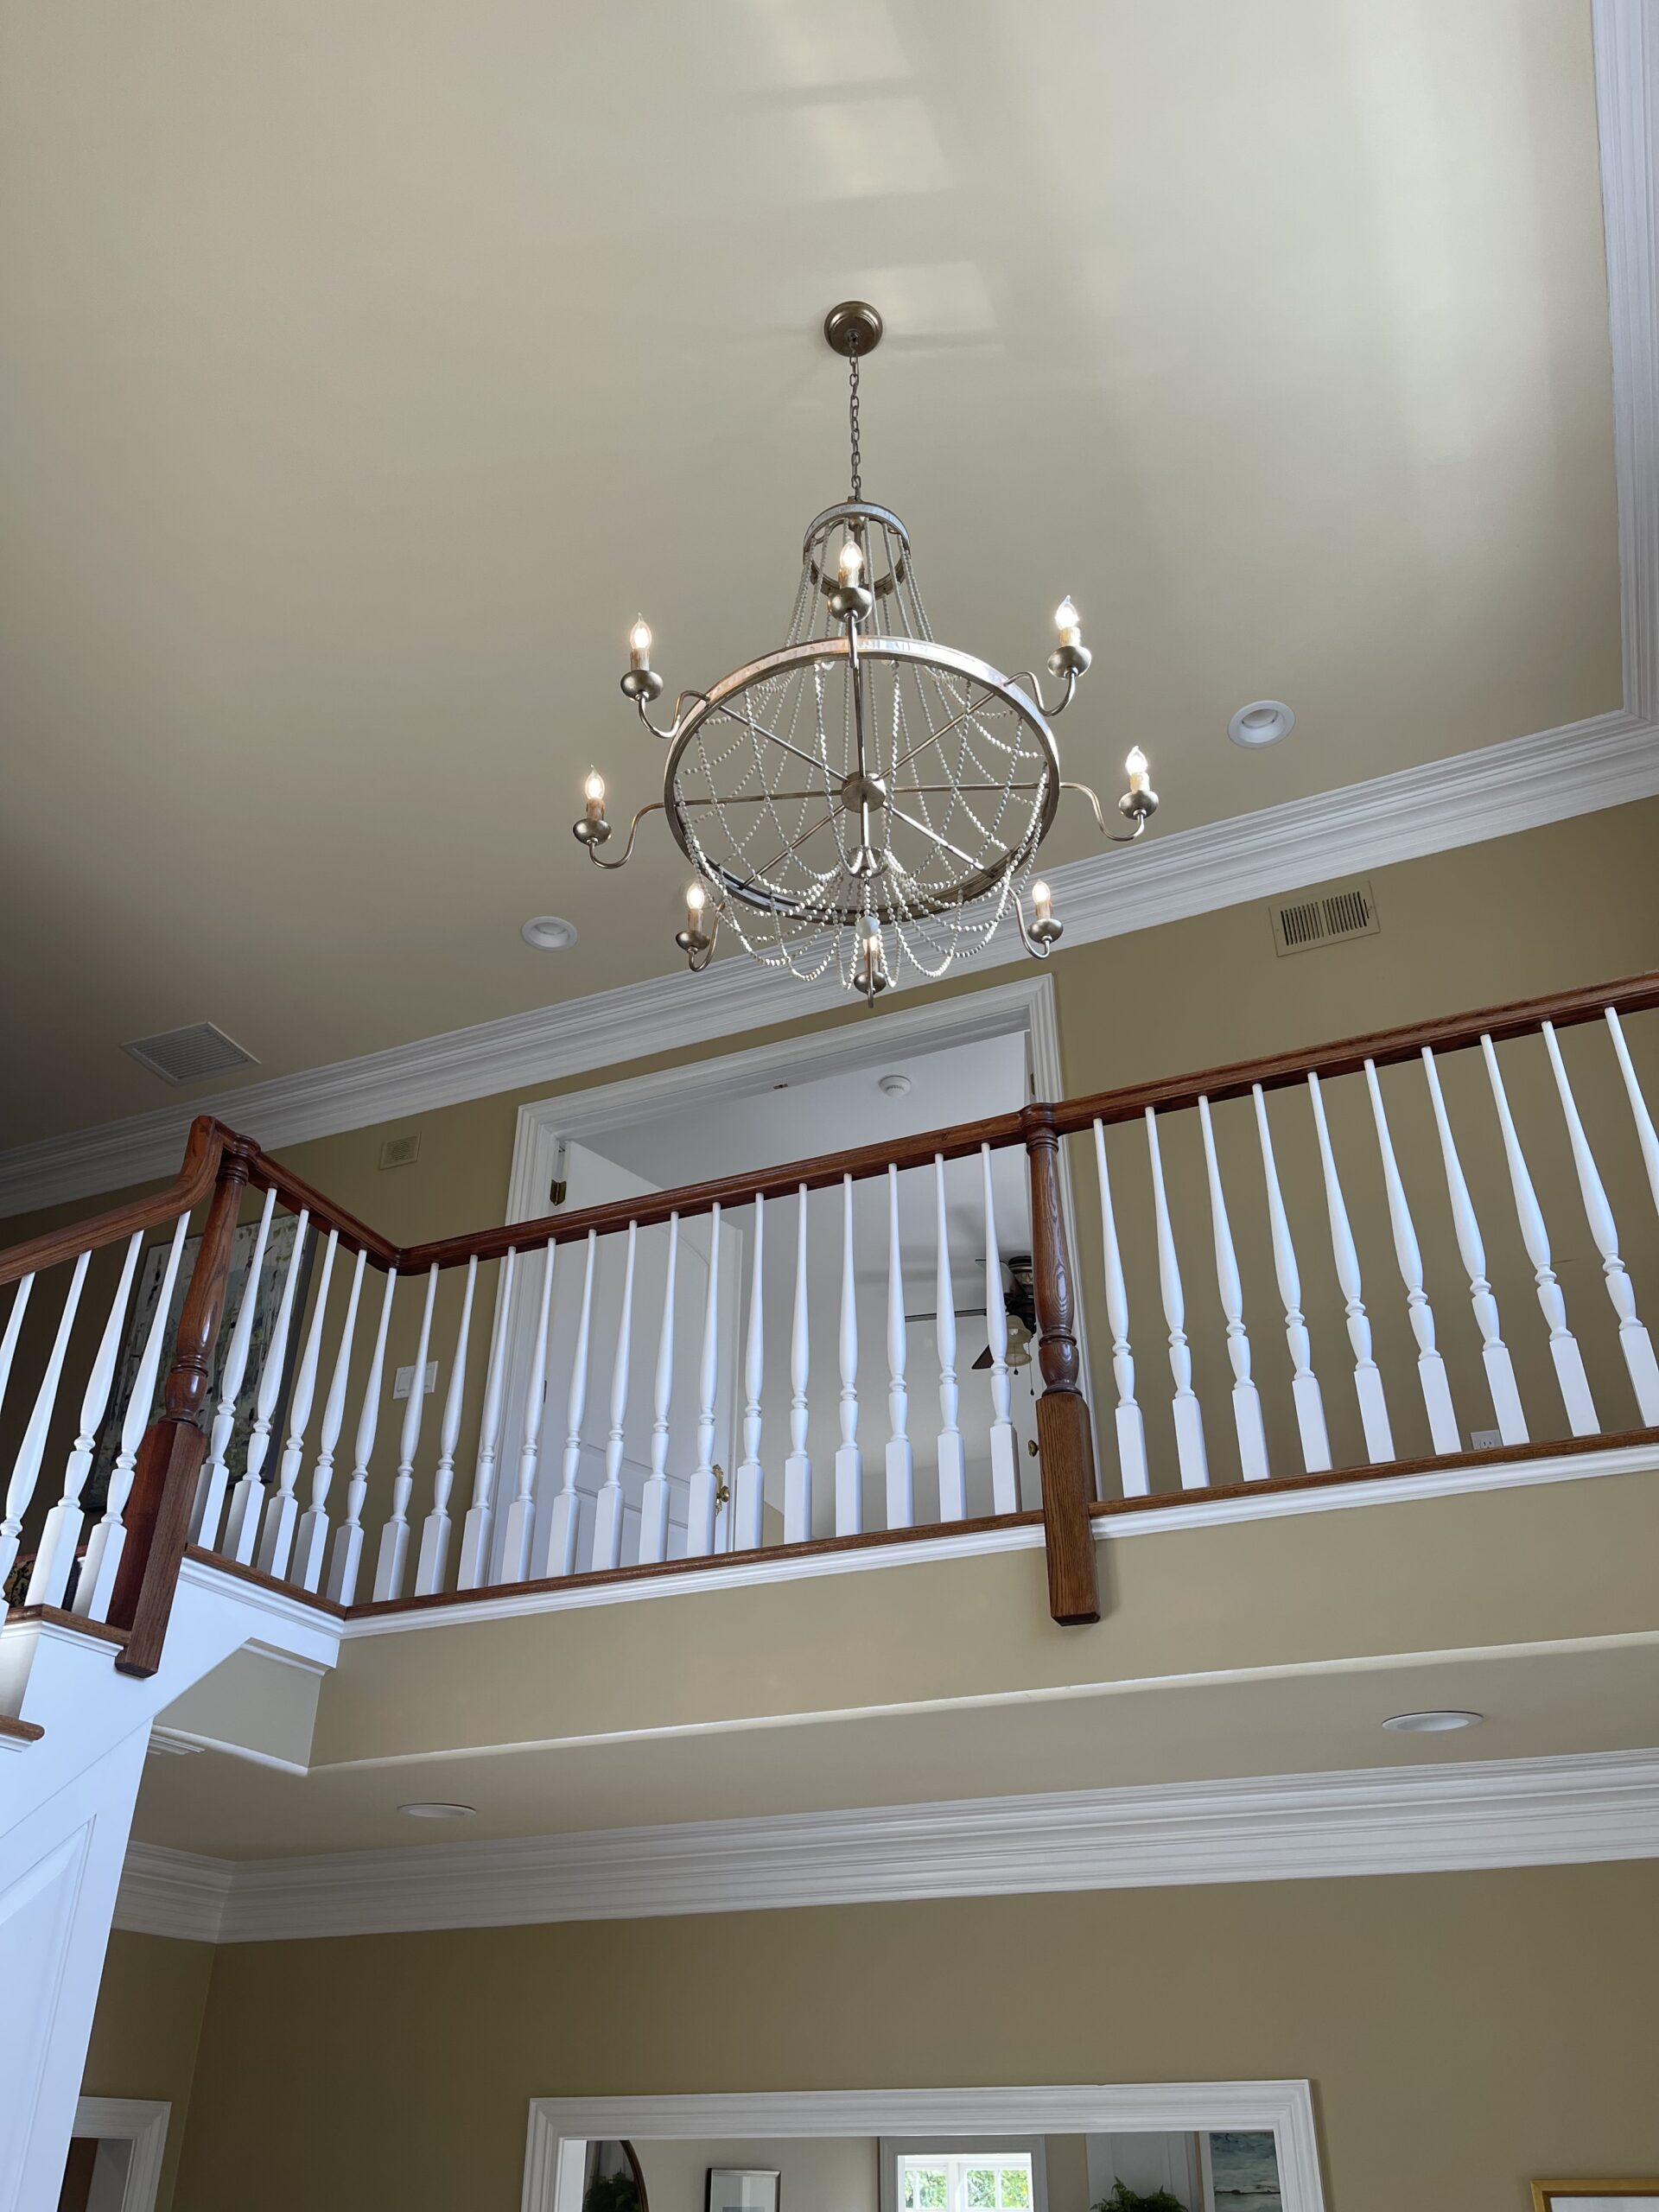 Grand chandelier lighting in a two-story foyer of a home in Morristown, NJ.